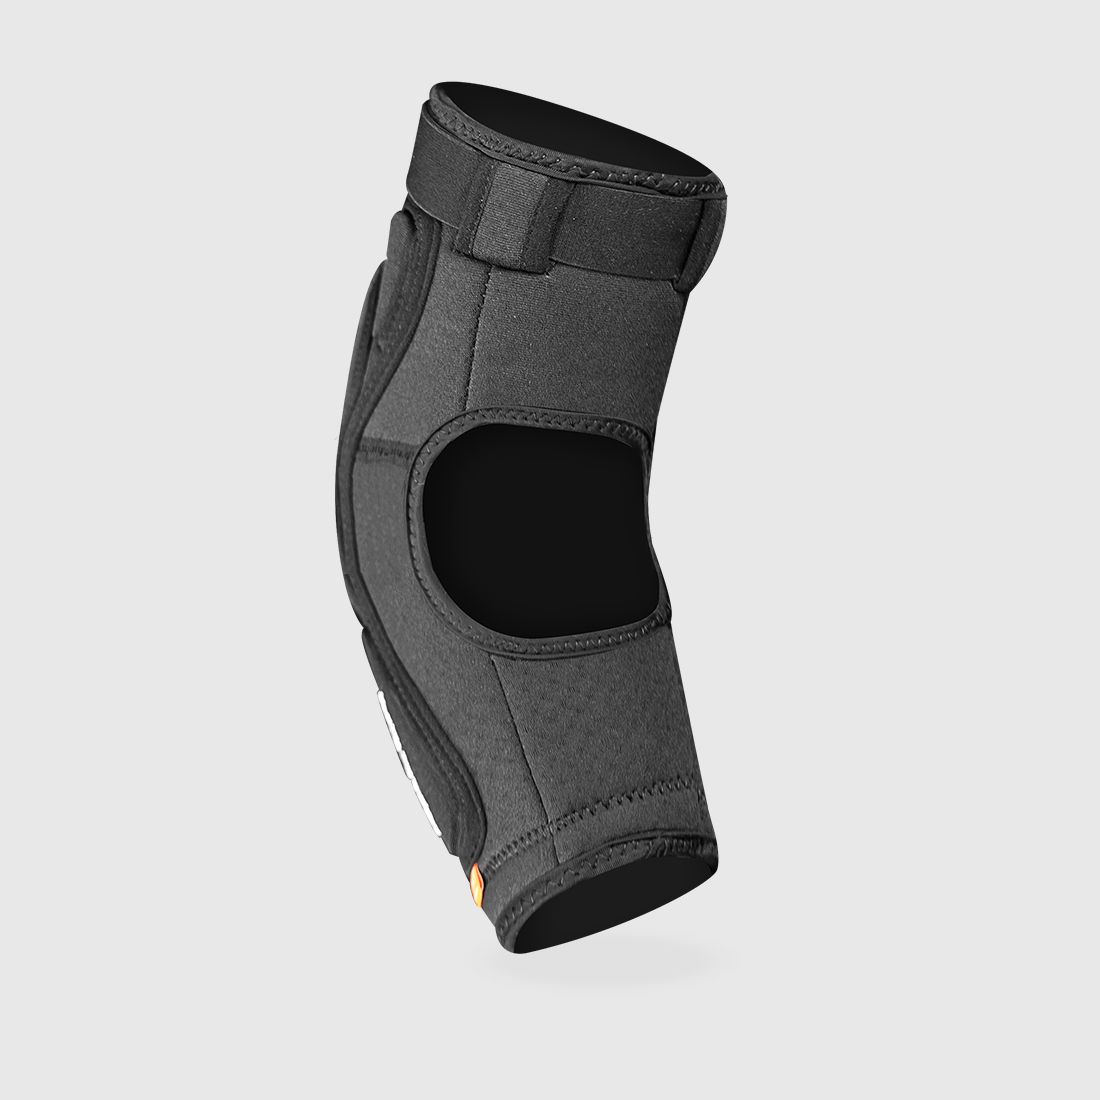 PROFILE ELBOW - BICYCLE PROTECTIONS